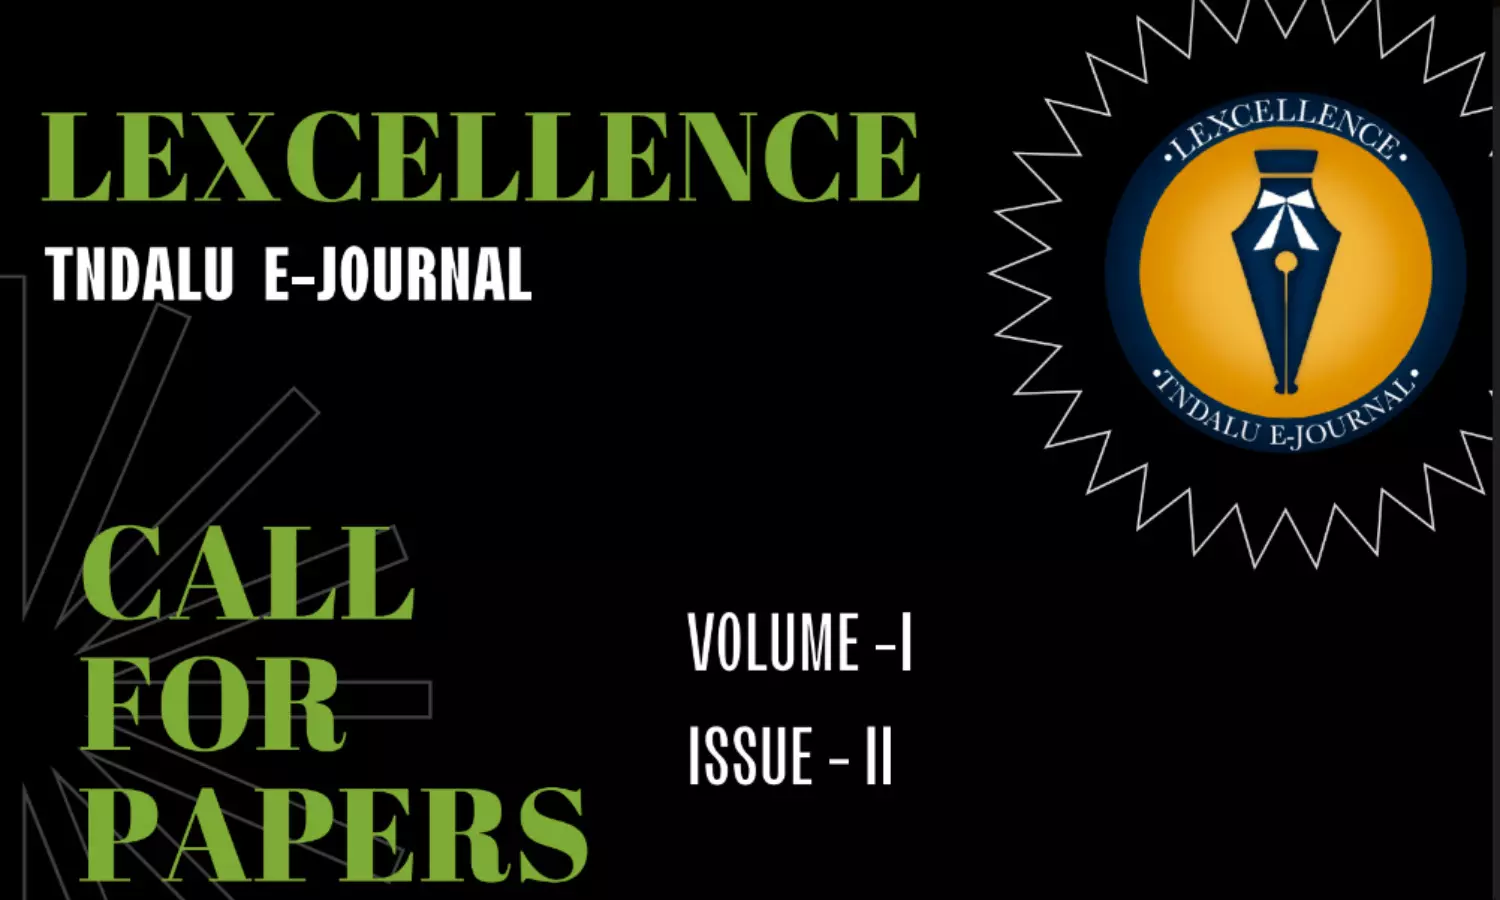 Call for Papers | Lexcellence E Journal Vol 1 Issue 2 | SOEL, TNDALU | Submit by 30 April, 2023.